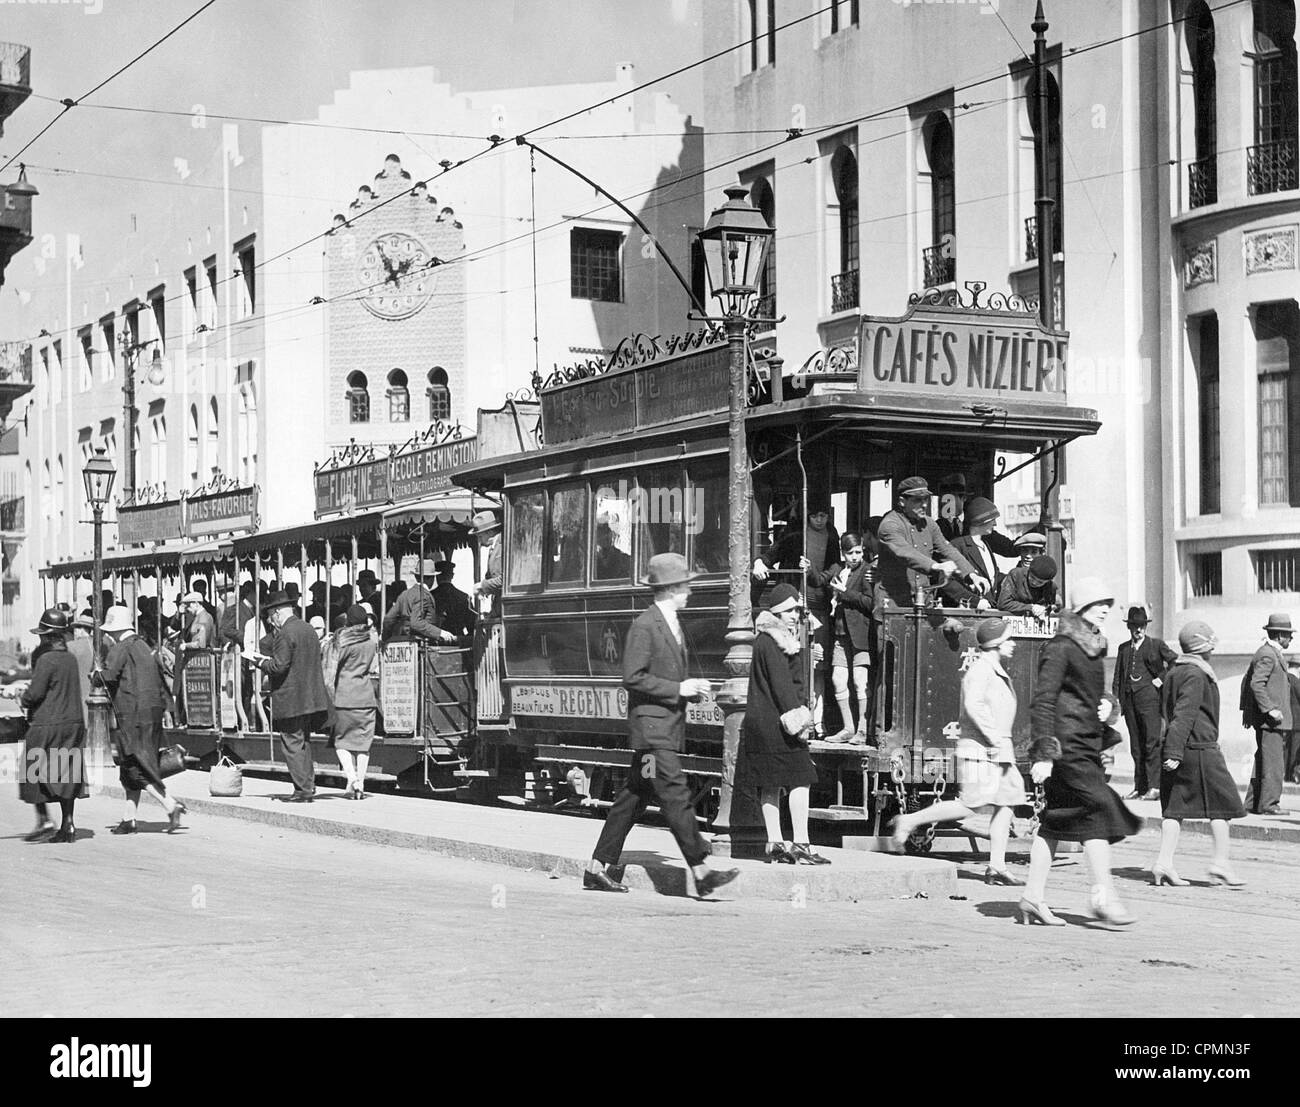 Canal Street New York probably early 1900s Stock Photo - Alamy